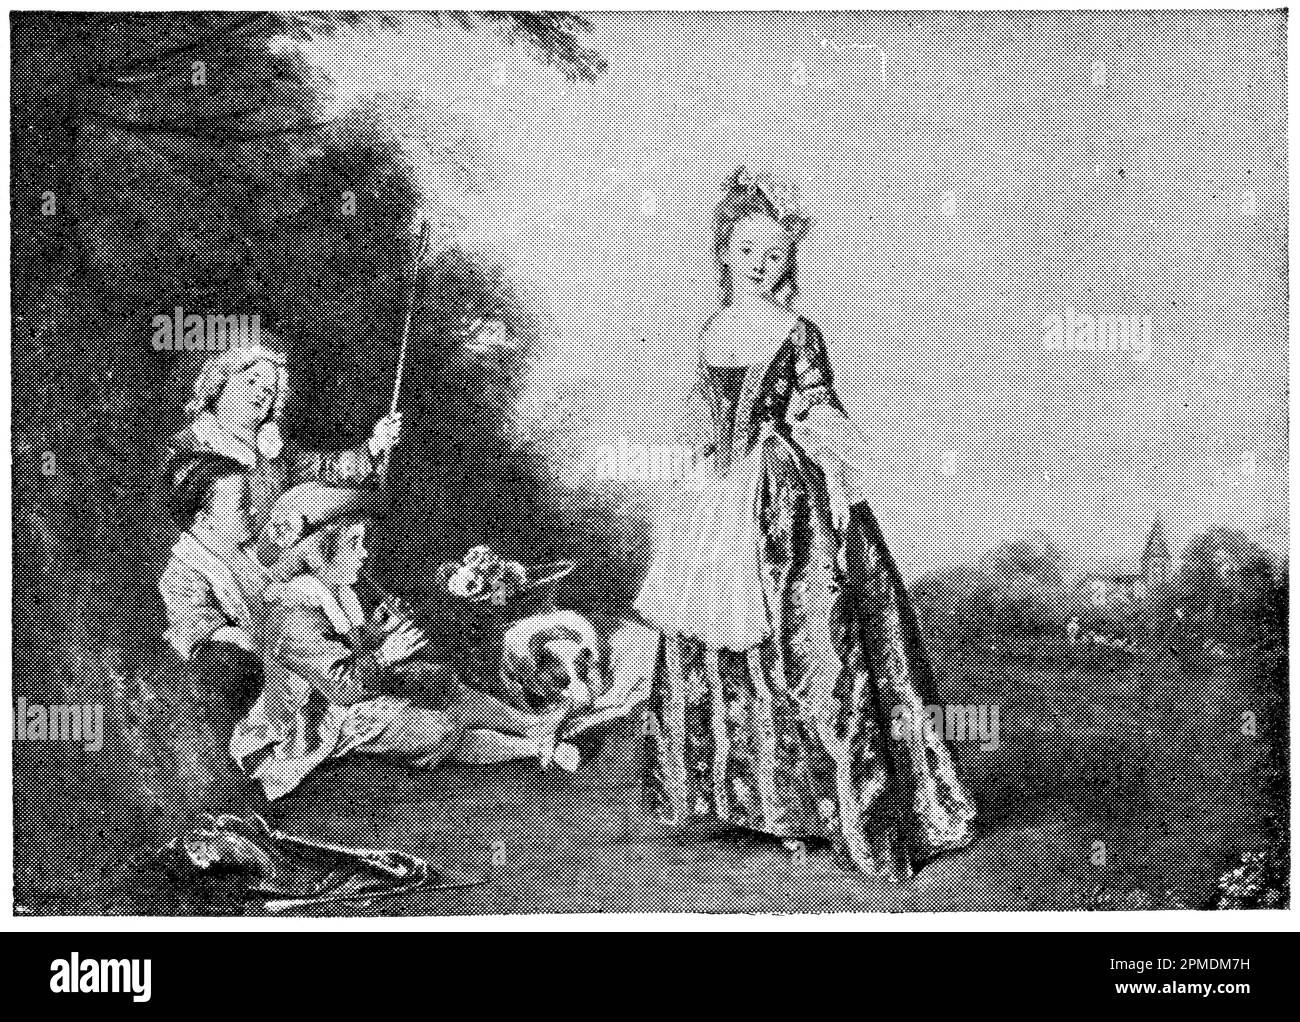 The Dance by a French painter and draughtsman Jean-Antoine Watteau. Publication of the book 'Meyers Konversations-Lexikon', Volume 2, Leipzig, Germany, 1910 Stock Photo